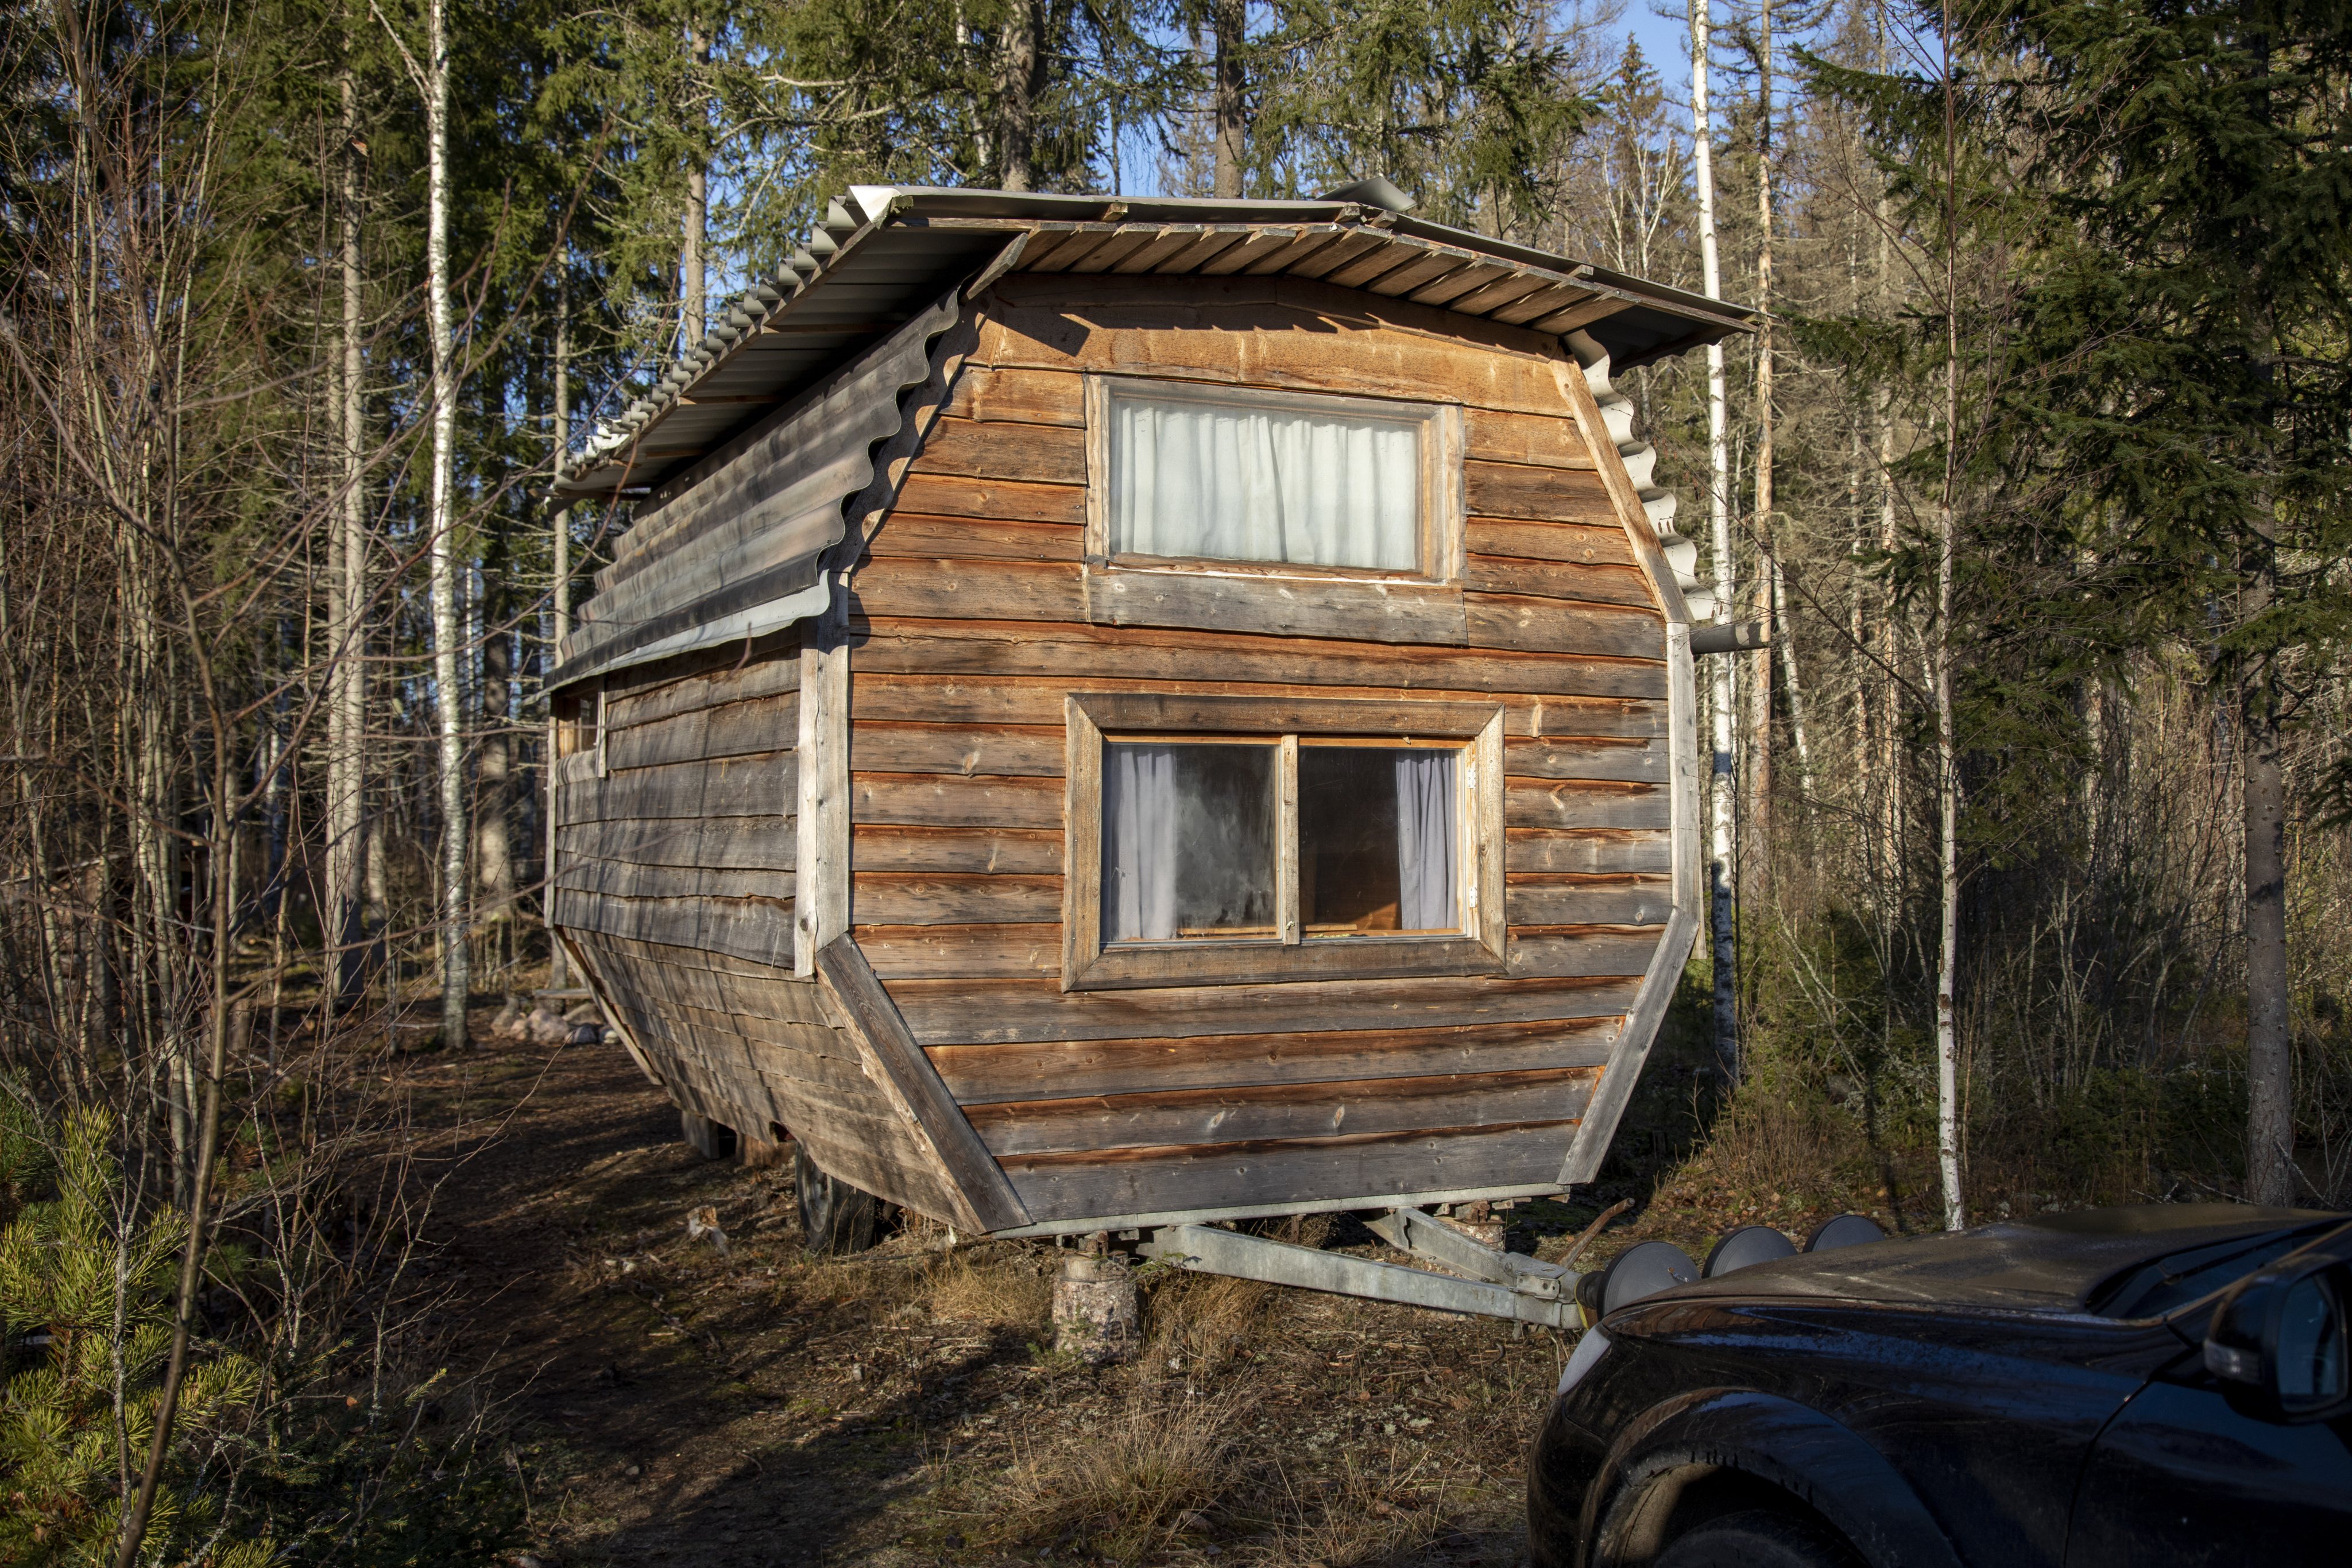 Tiny house community in Sweden